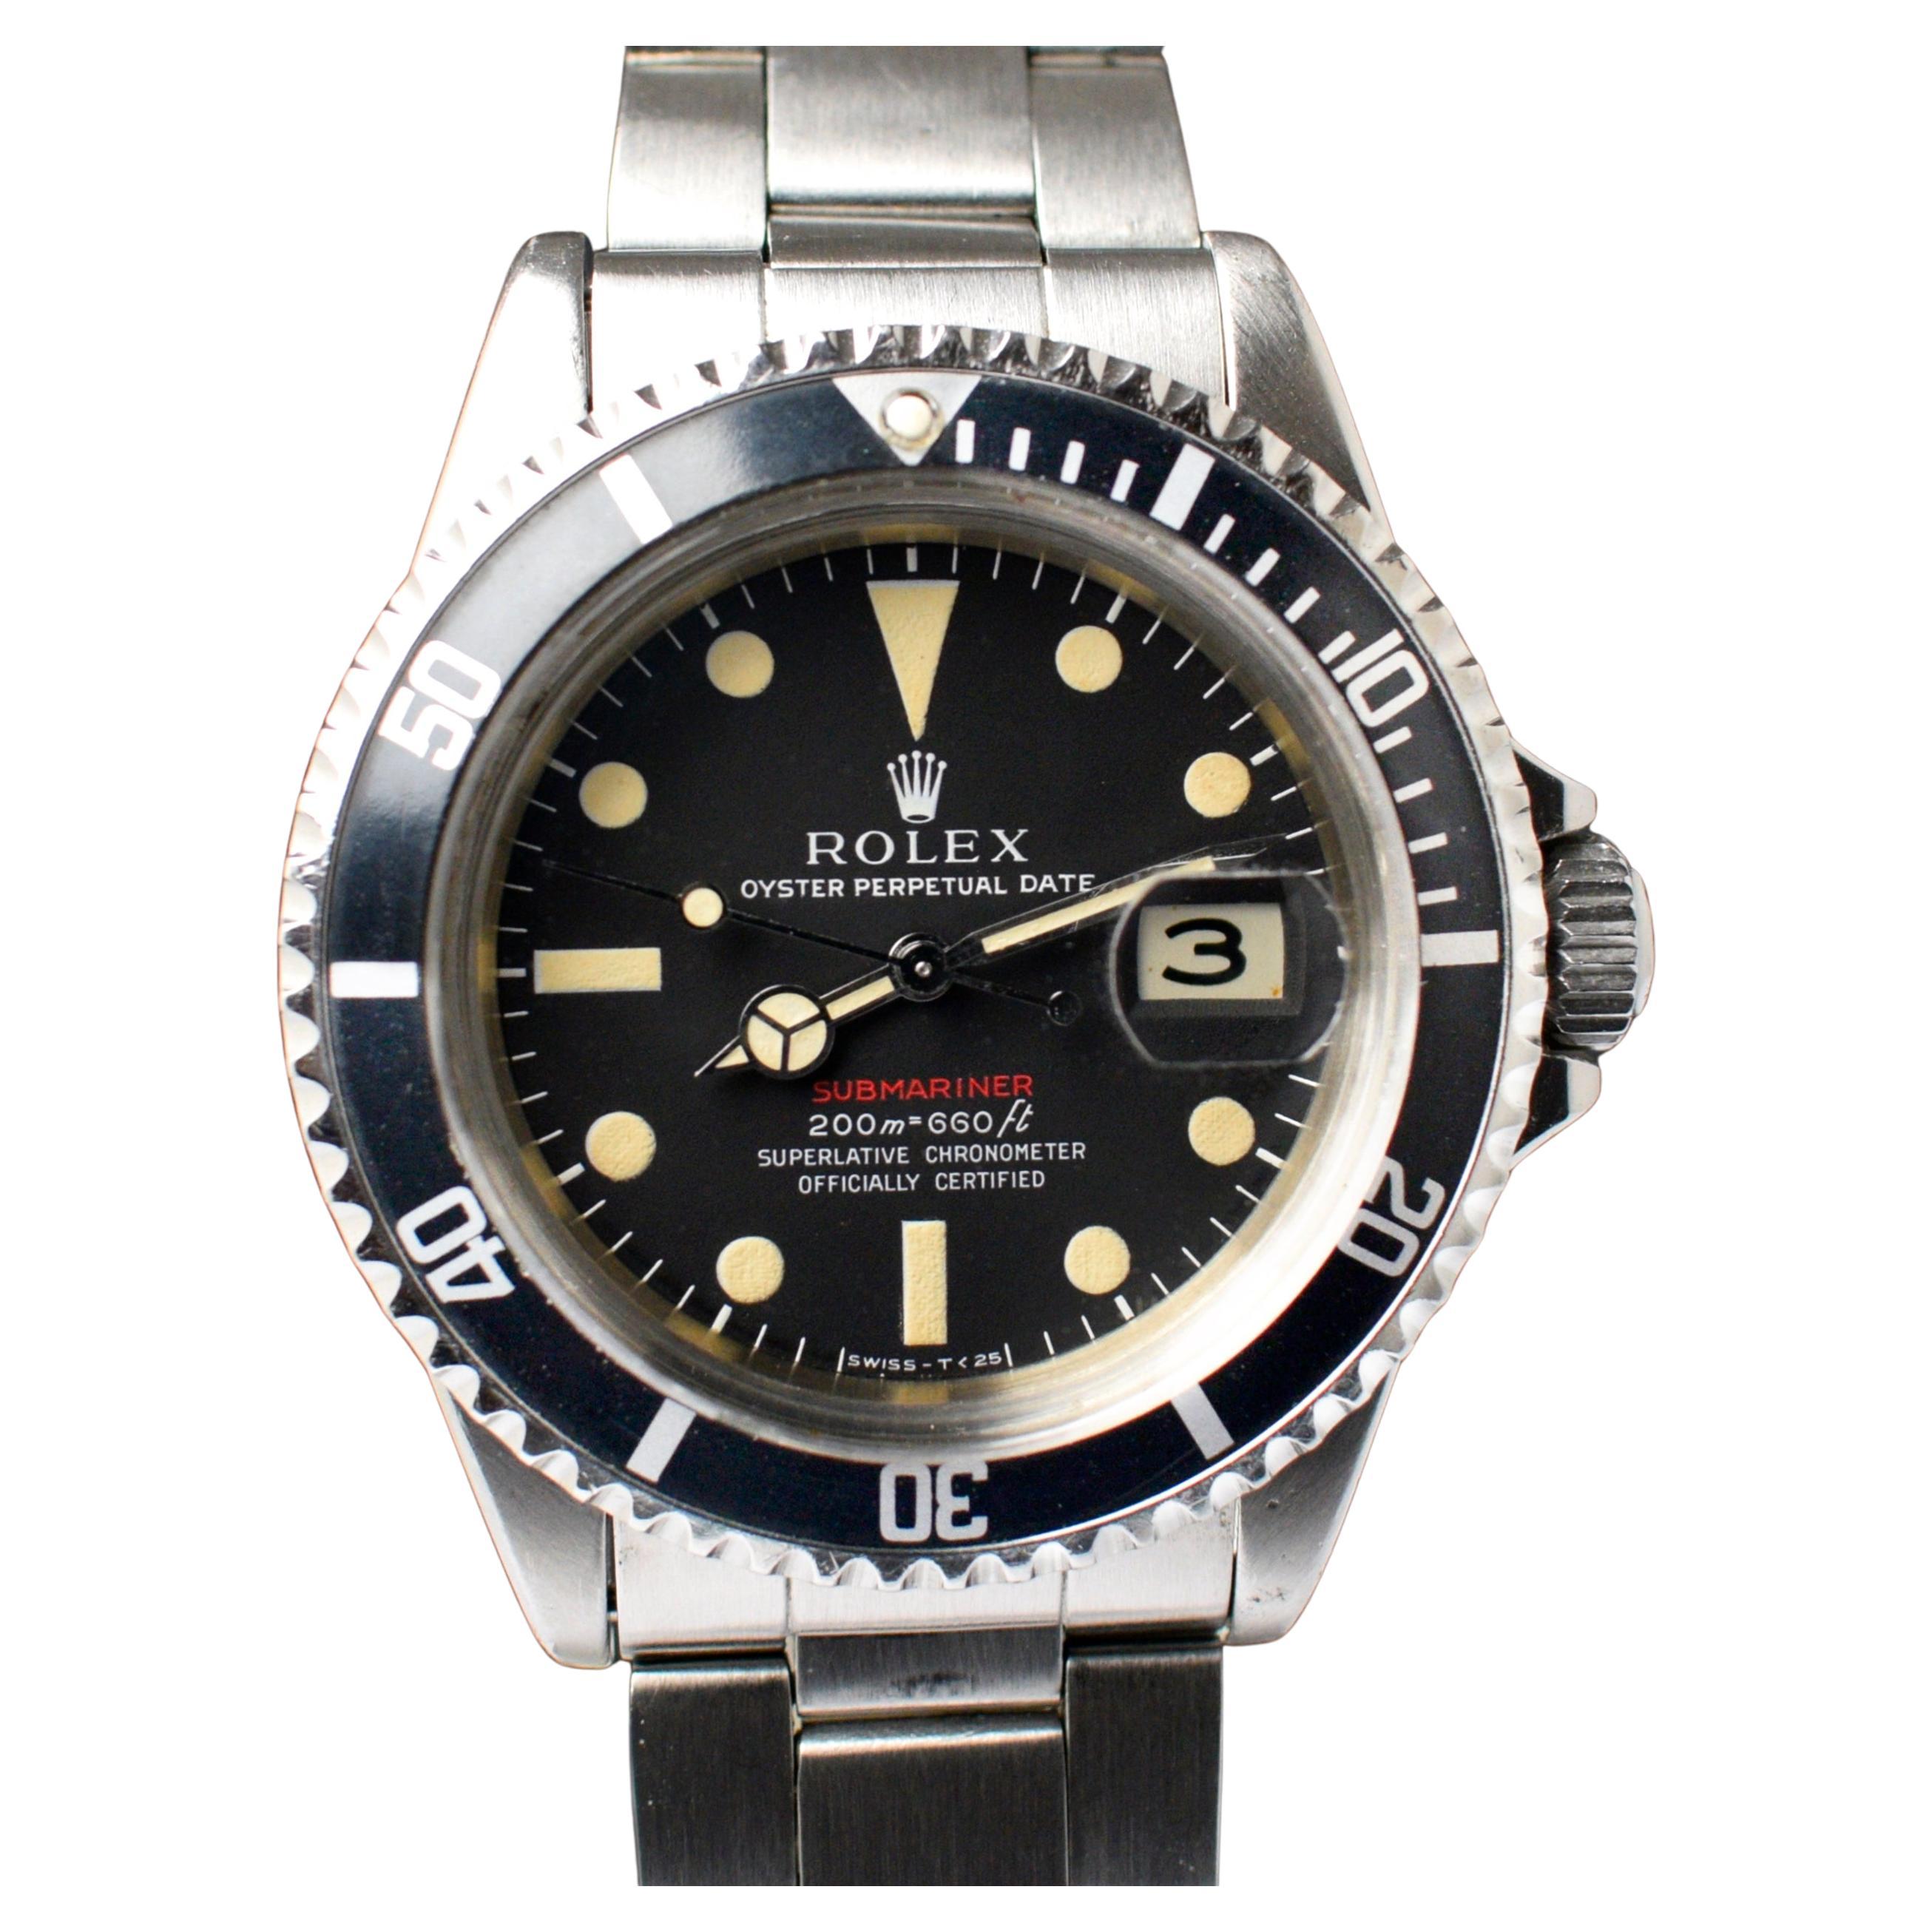 Does Rolex make a red Submariner?